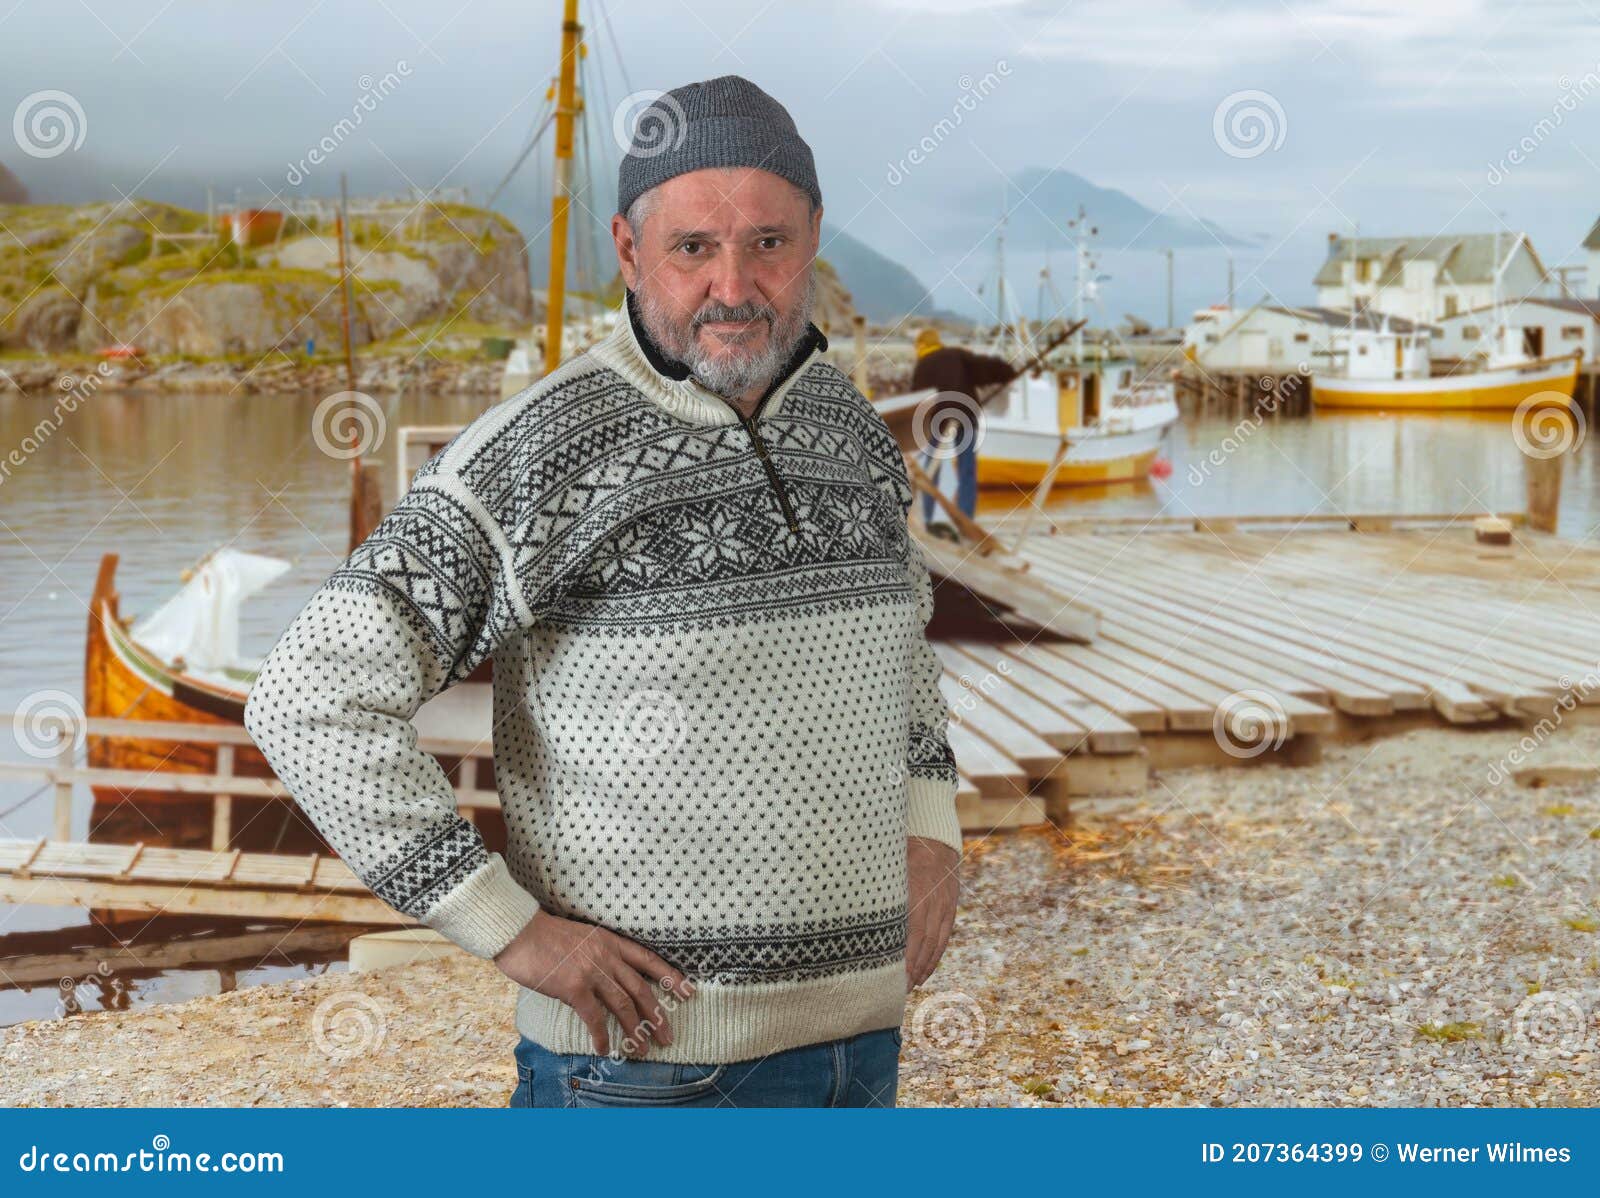 A Norwegian Fisherman with a Beard and a Typical Sweater is